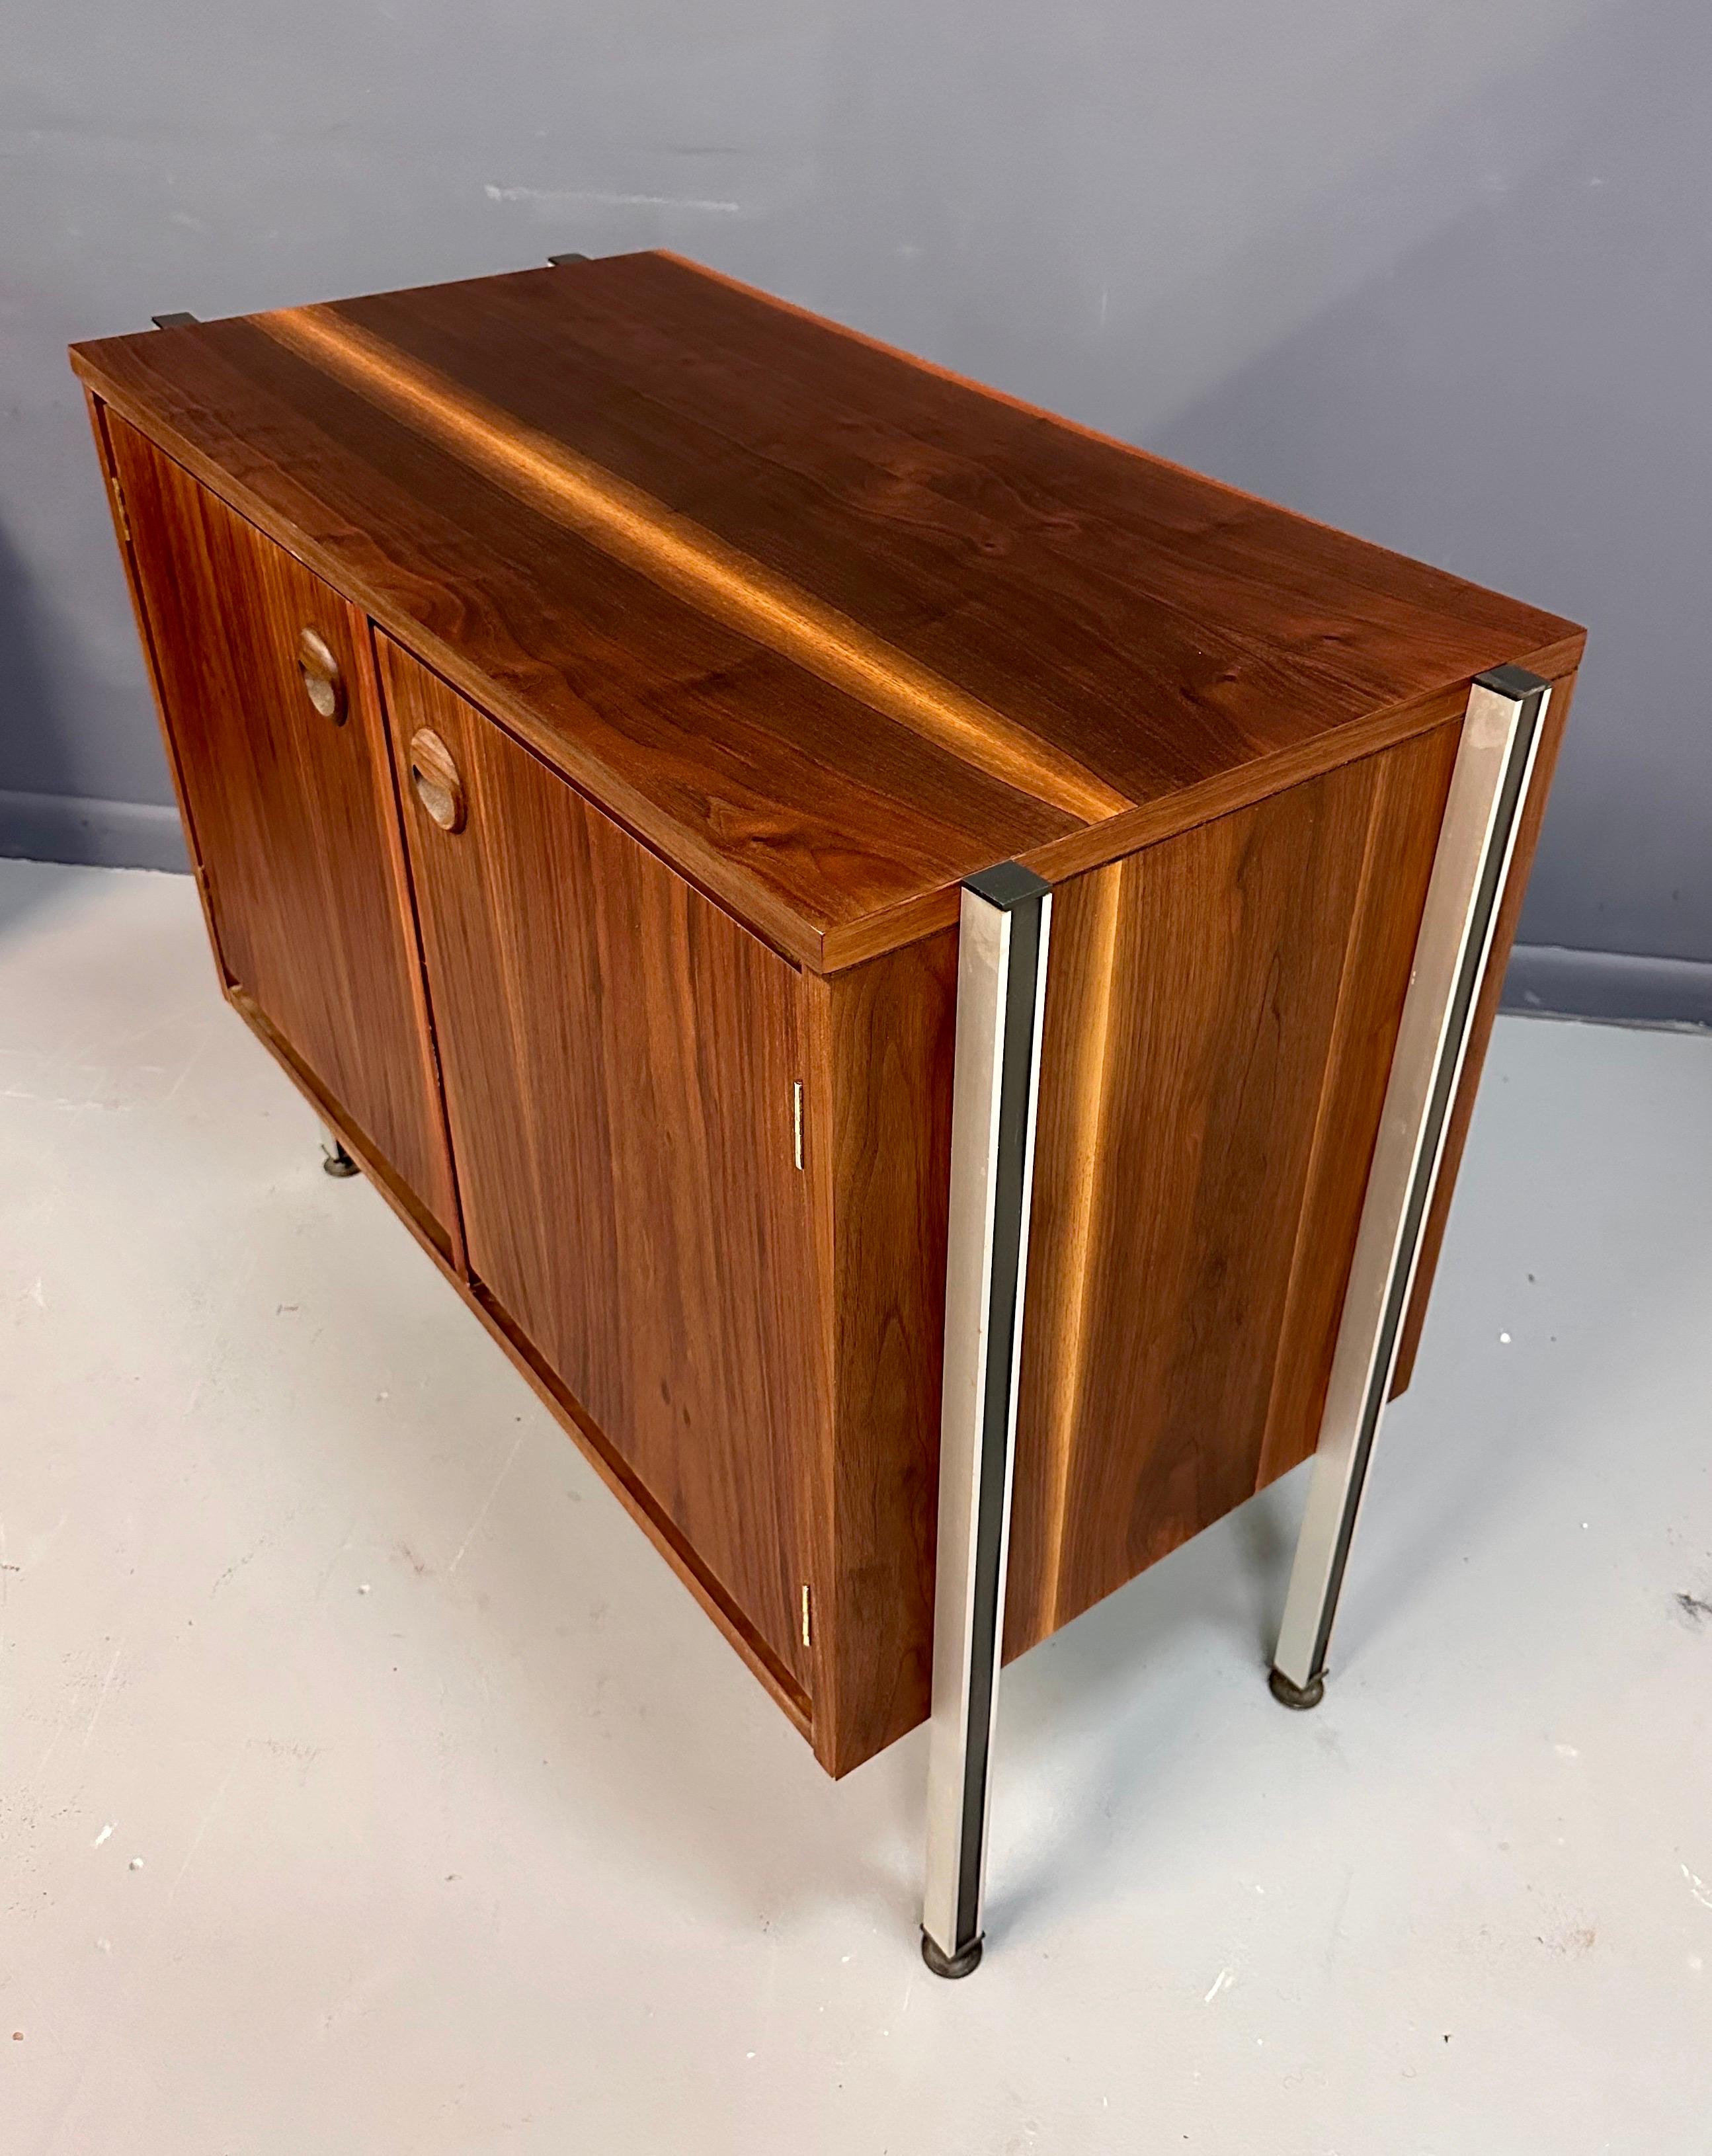 North American Pair of Midcentury Walnut Cabinets with Exposed Aluminum Legs Style of Wormley For Sale